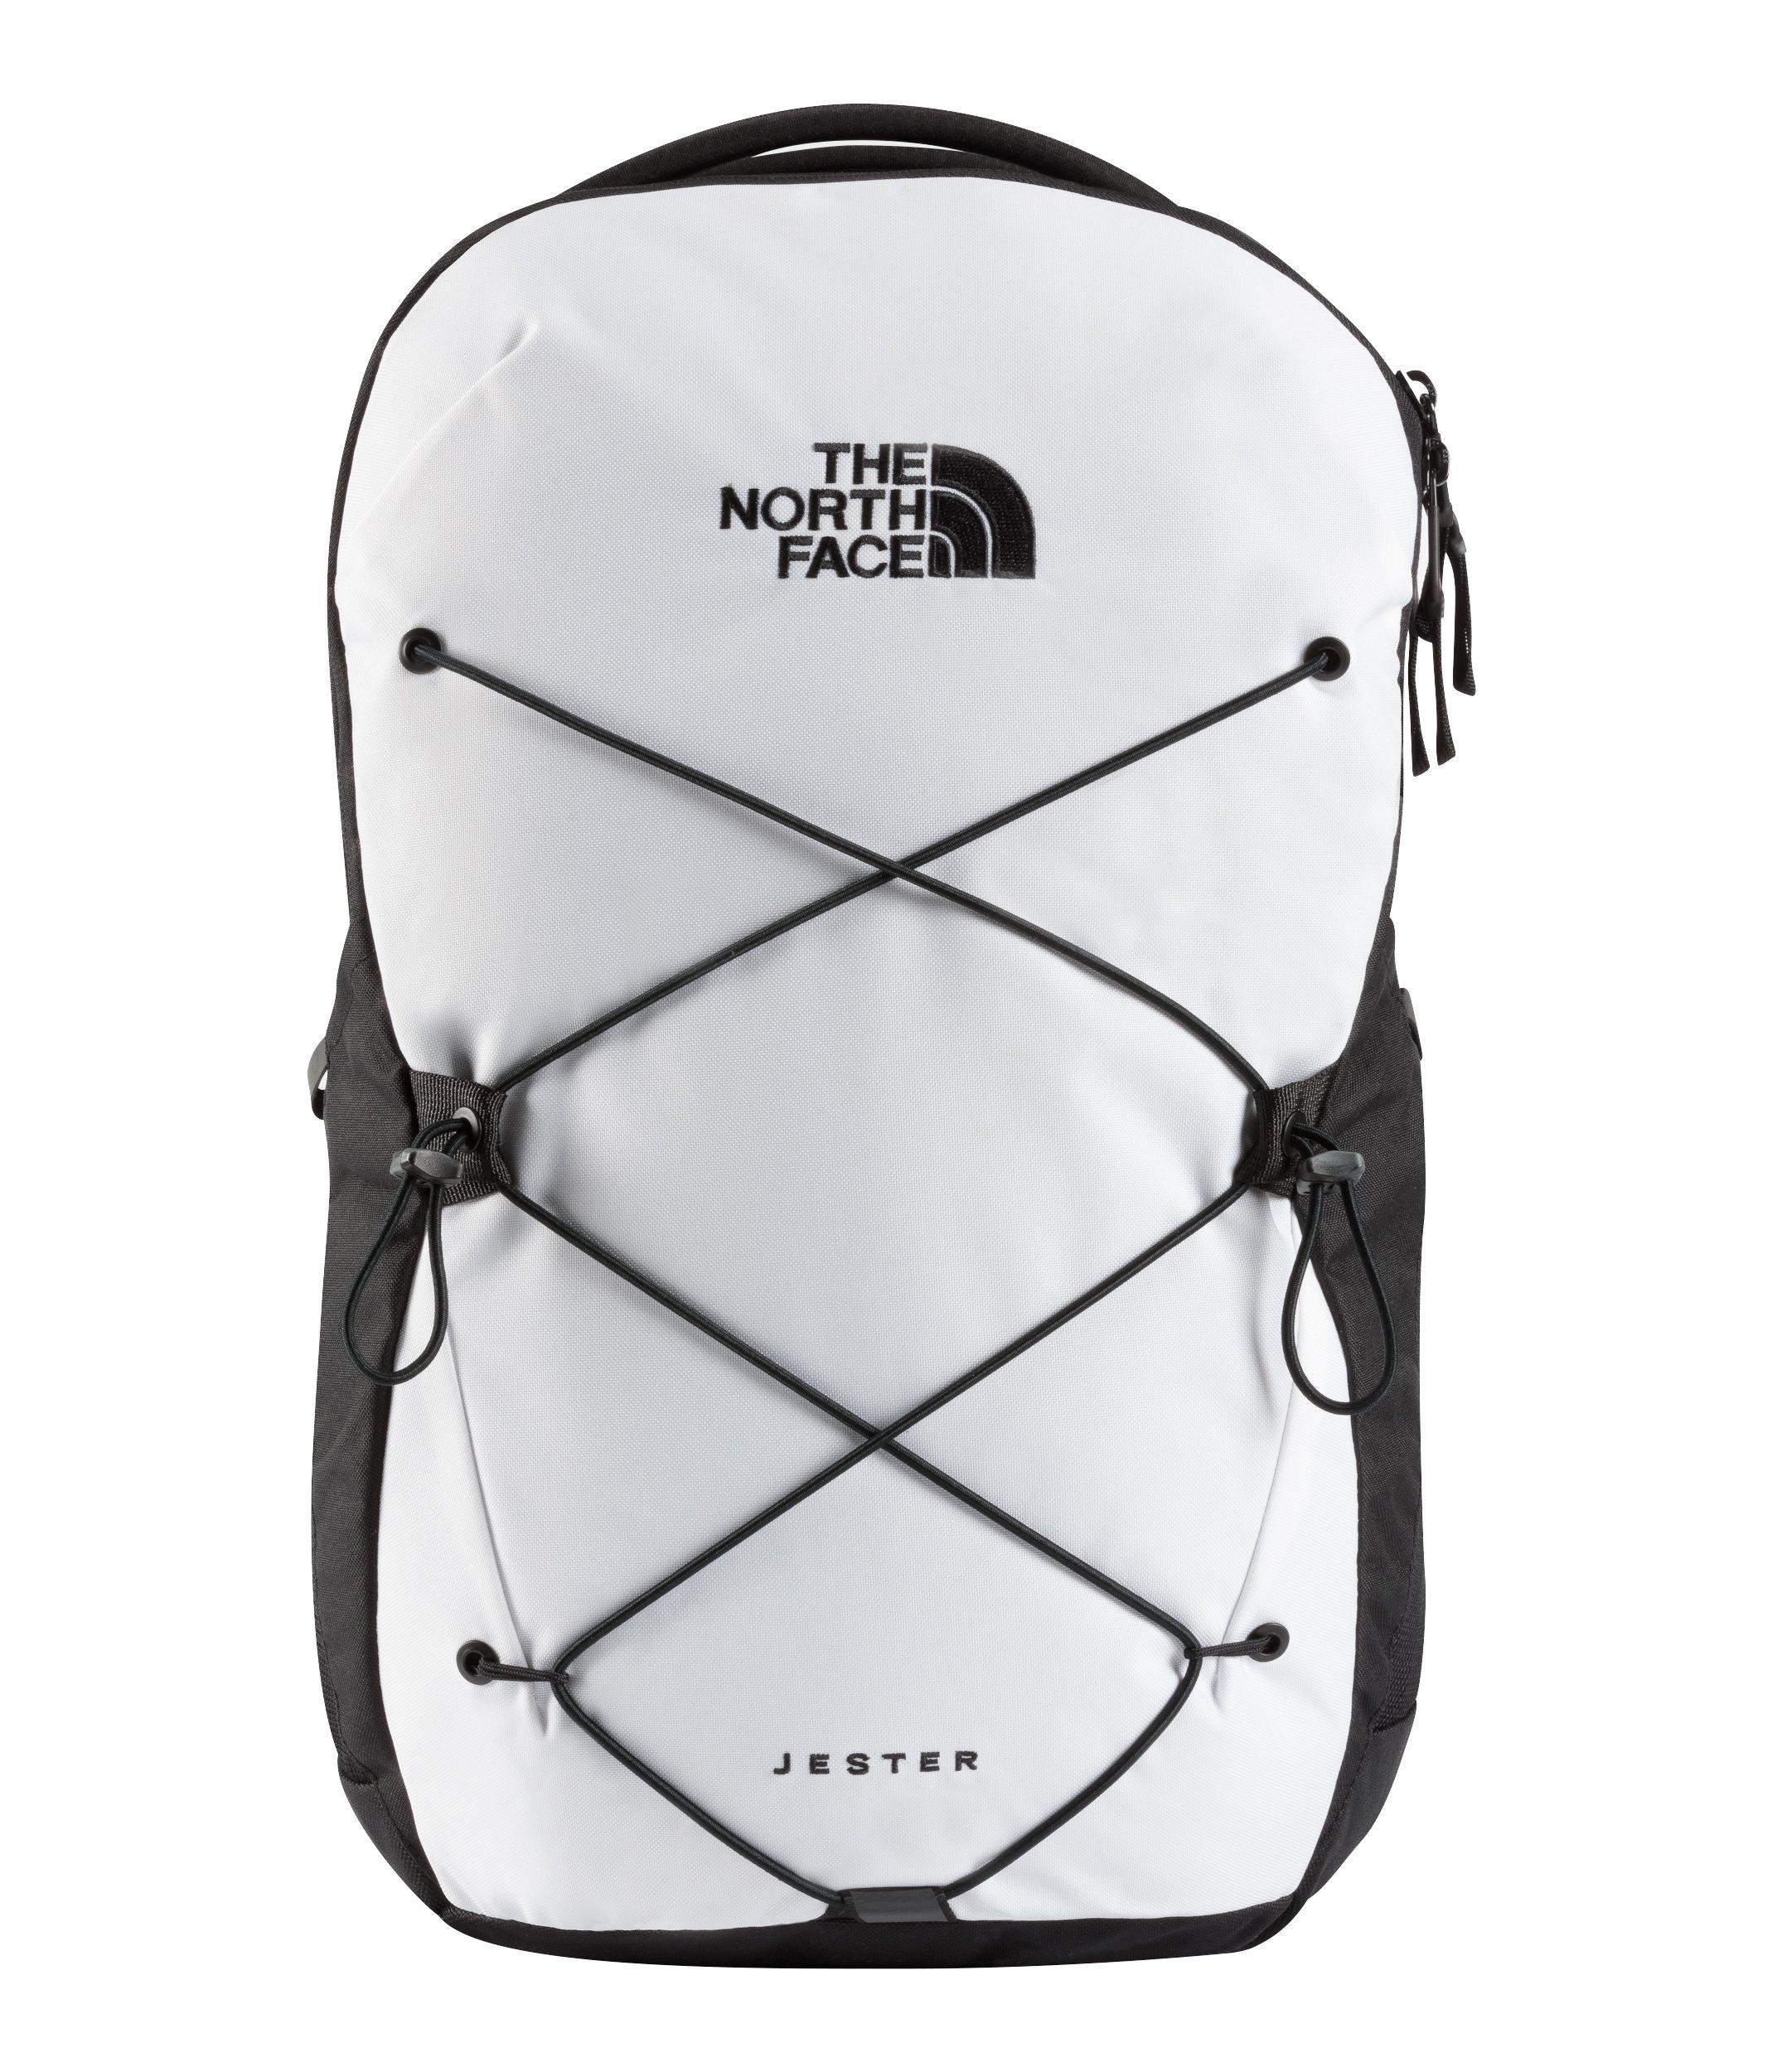 The North Face Jester Backpack-White/Black